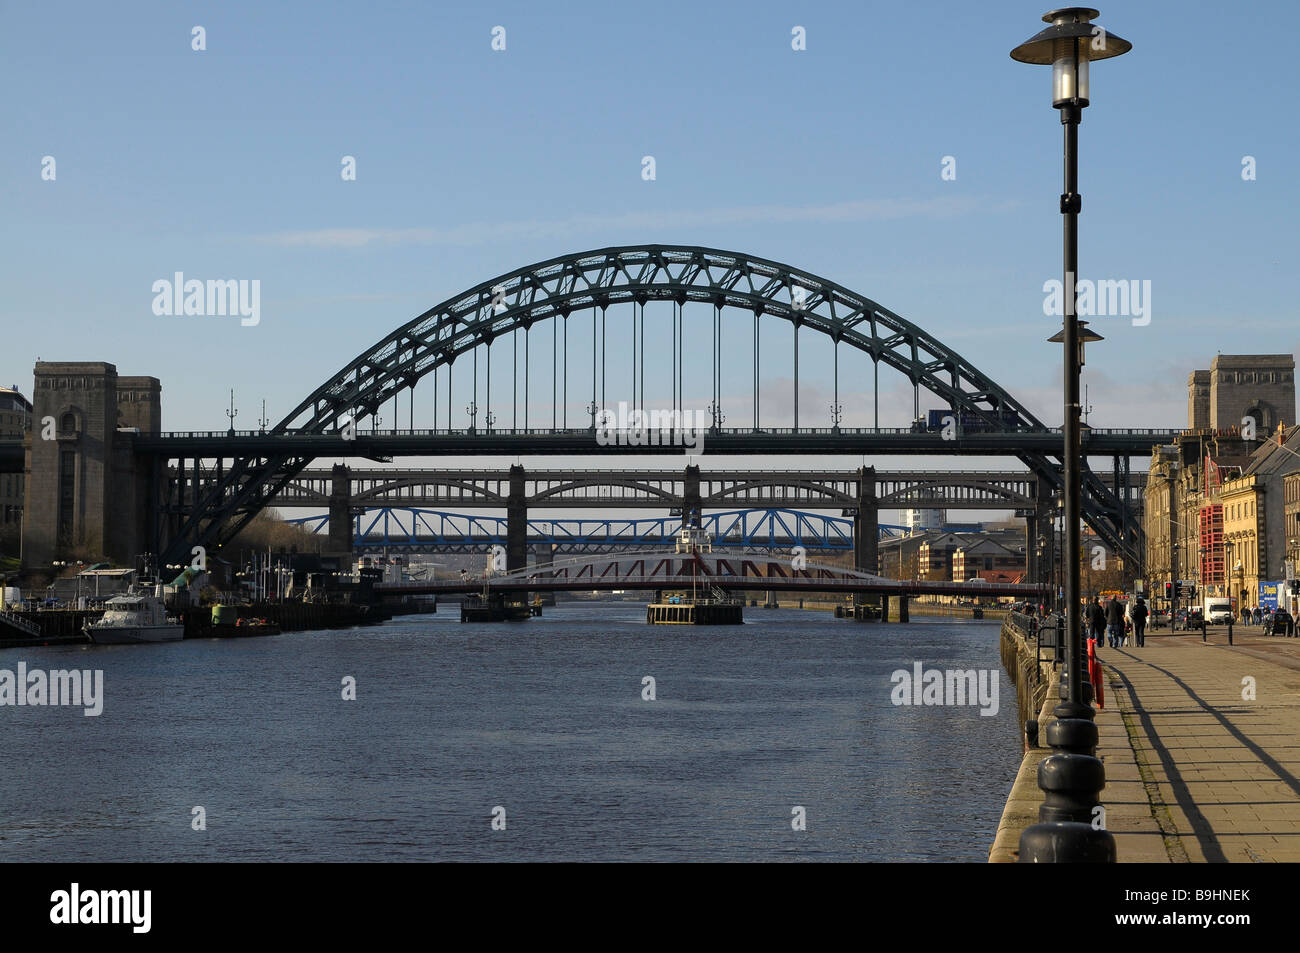 The river Tyne in Newcastle-upon-Tyne with the Tyne Bridge and the high-level road and railway bridge beyond Stock Photo